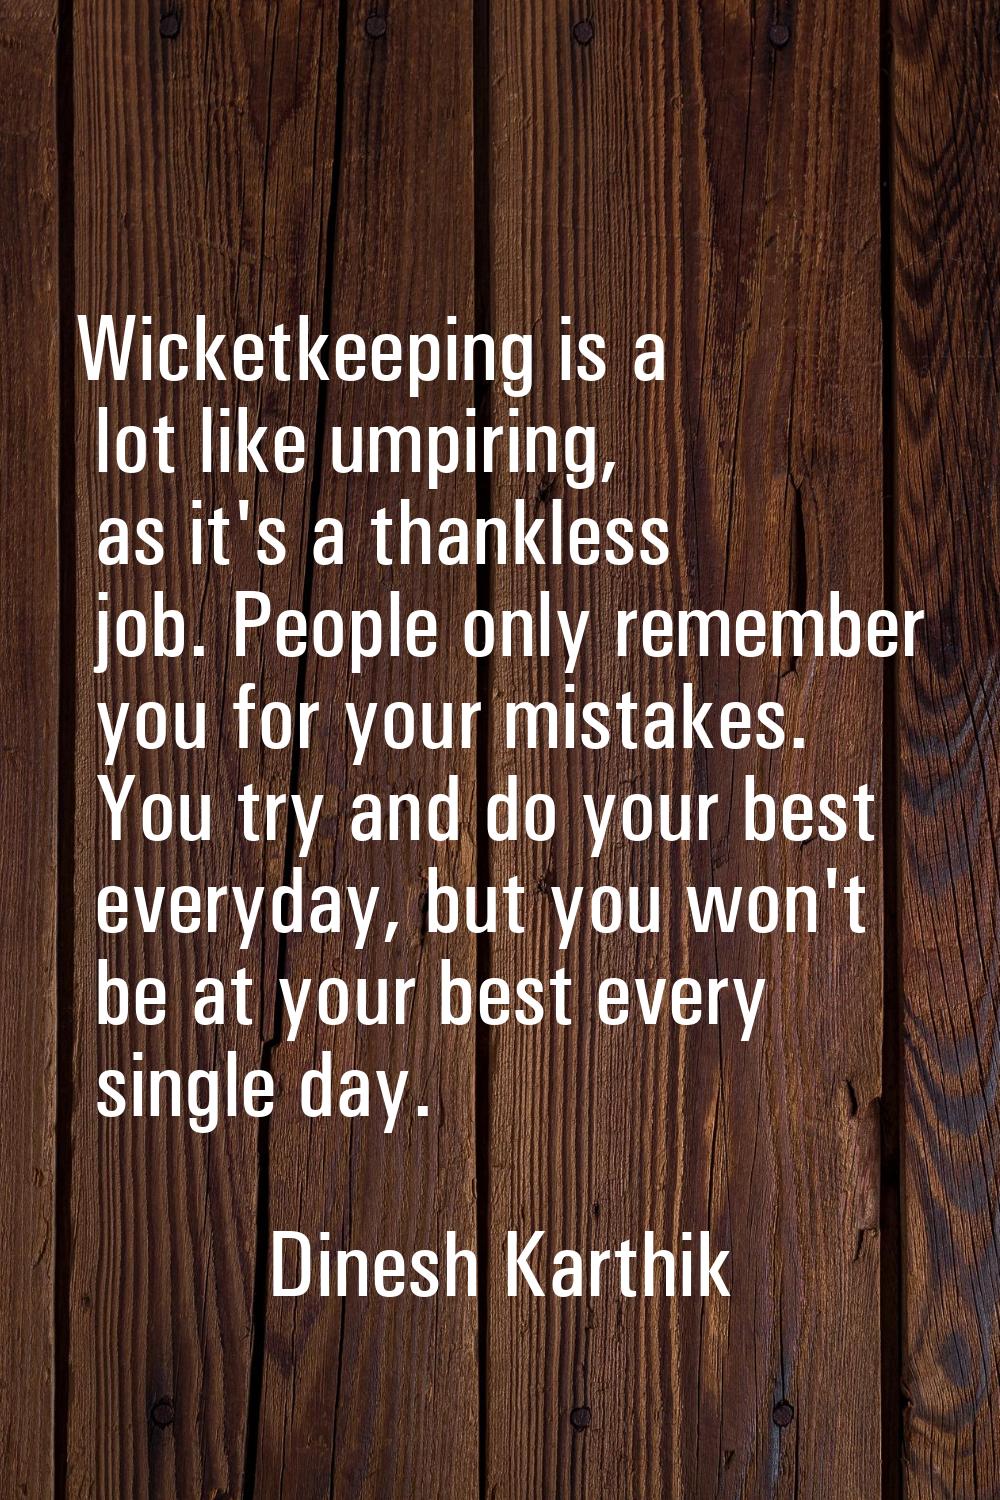 Wicketkeeping is a lot like umpiring, as it's a thankless job. People only remember you for your mi